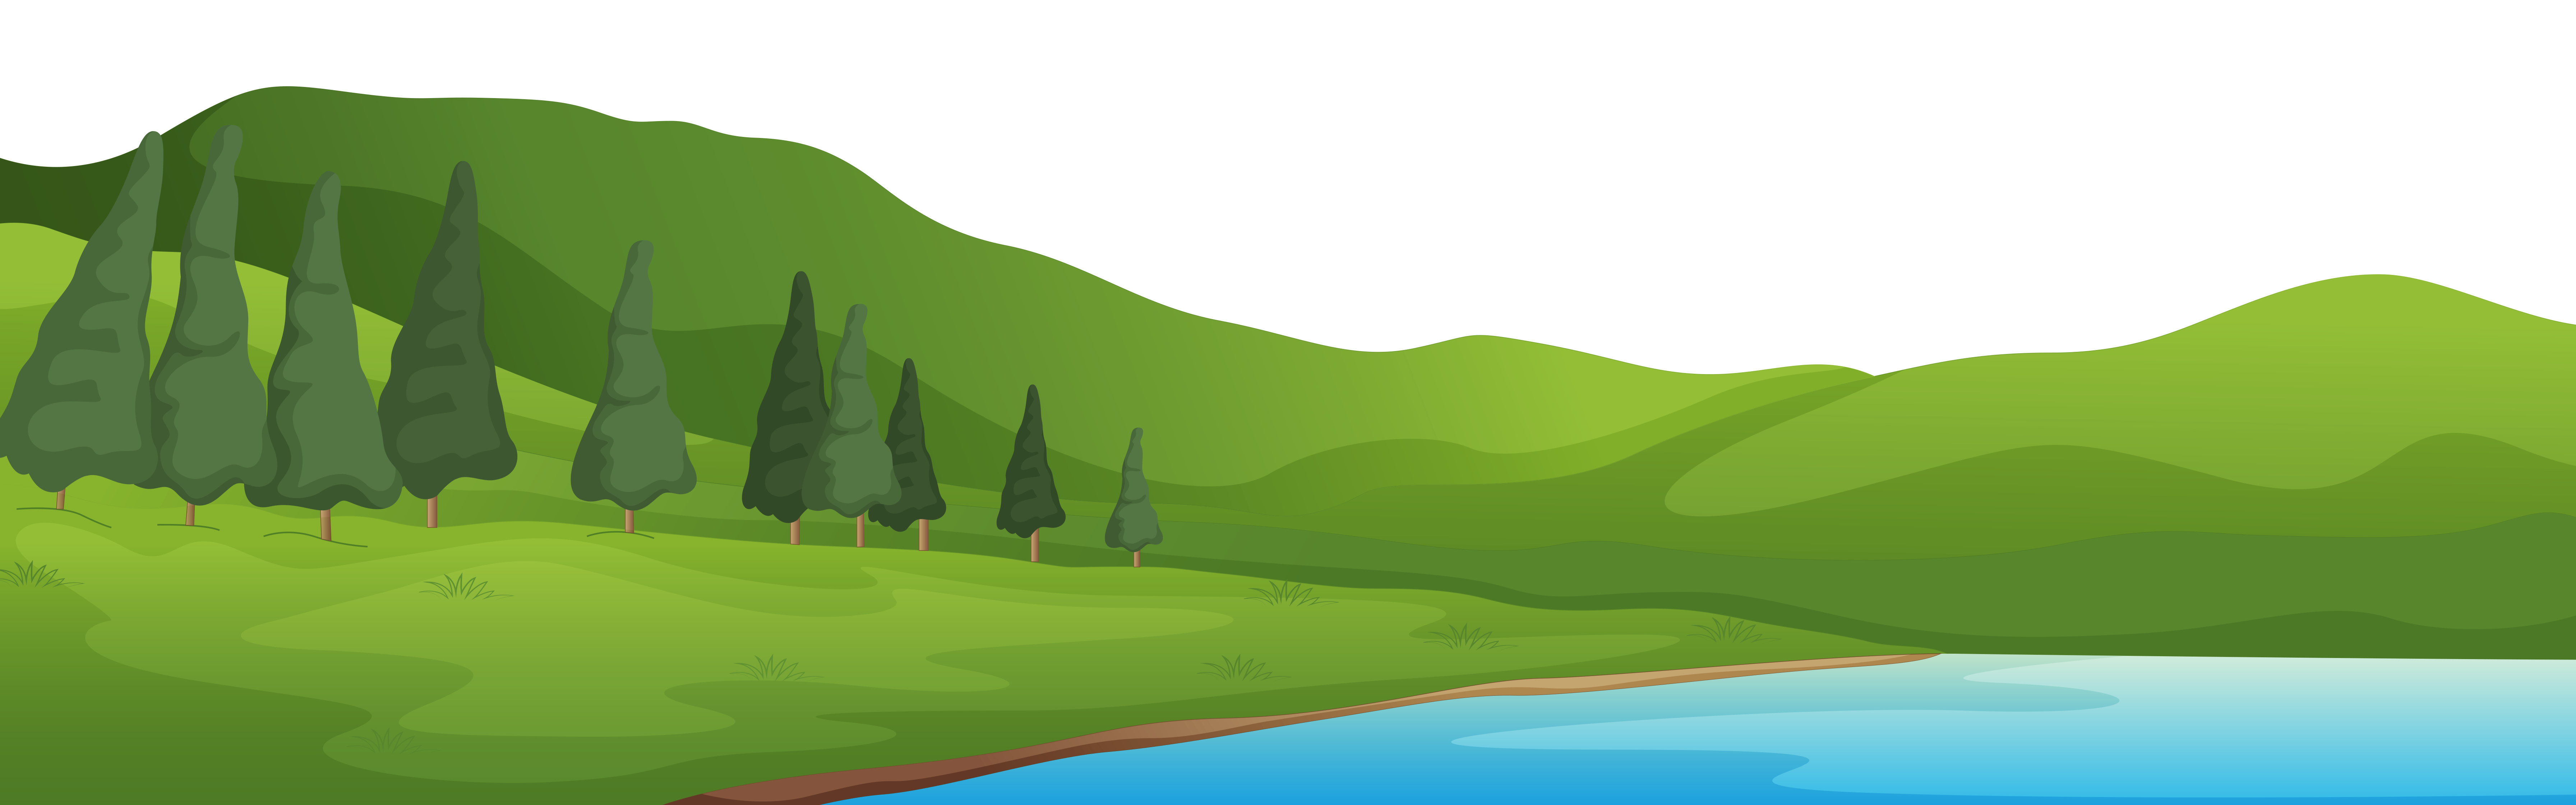 Mountain and lake ground. Warrior clipart lakeview